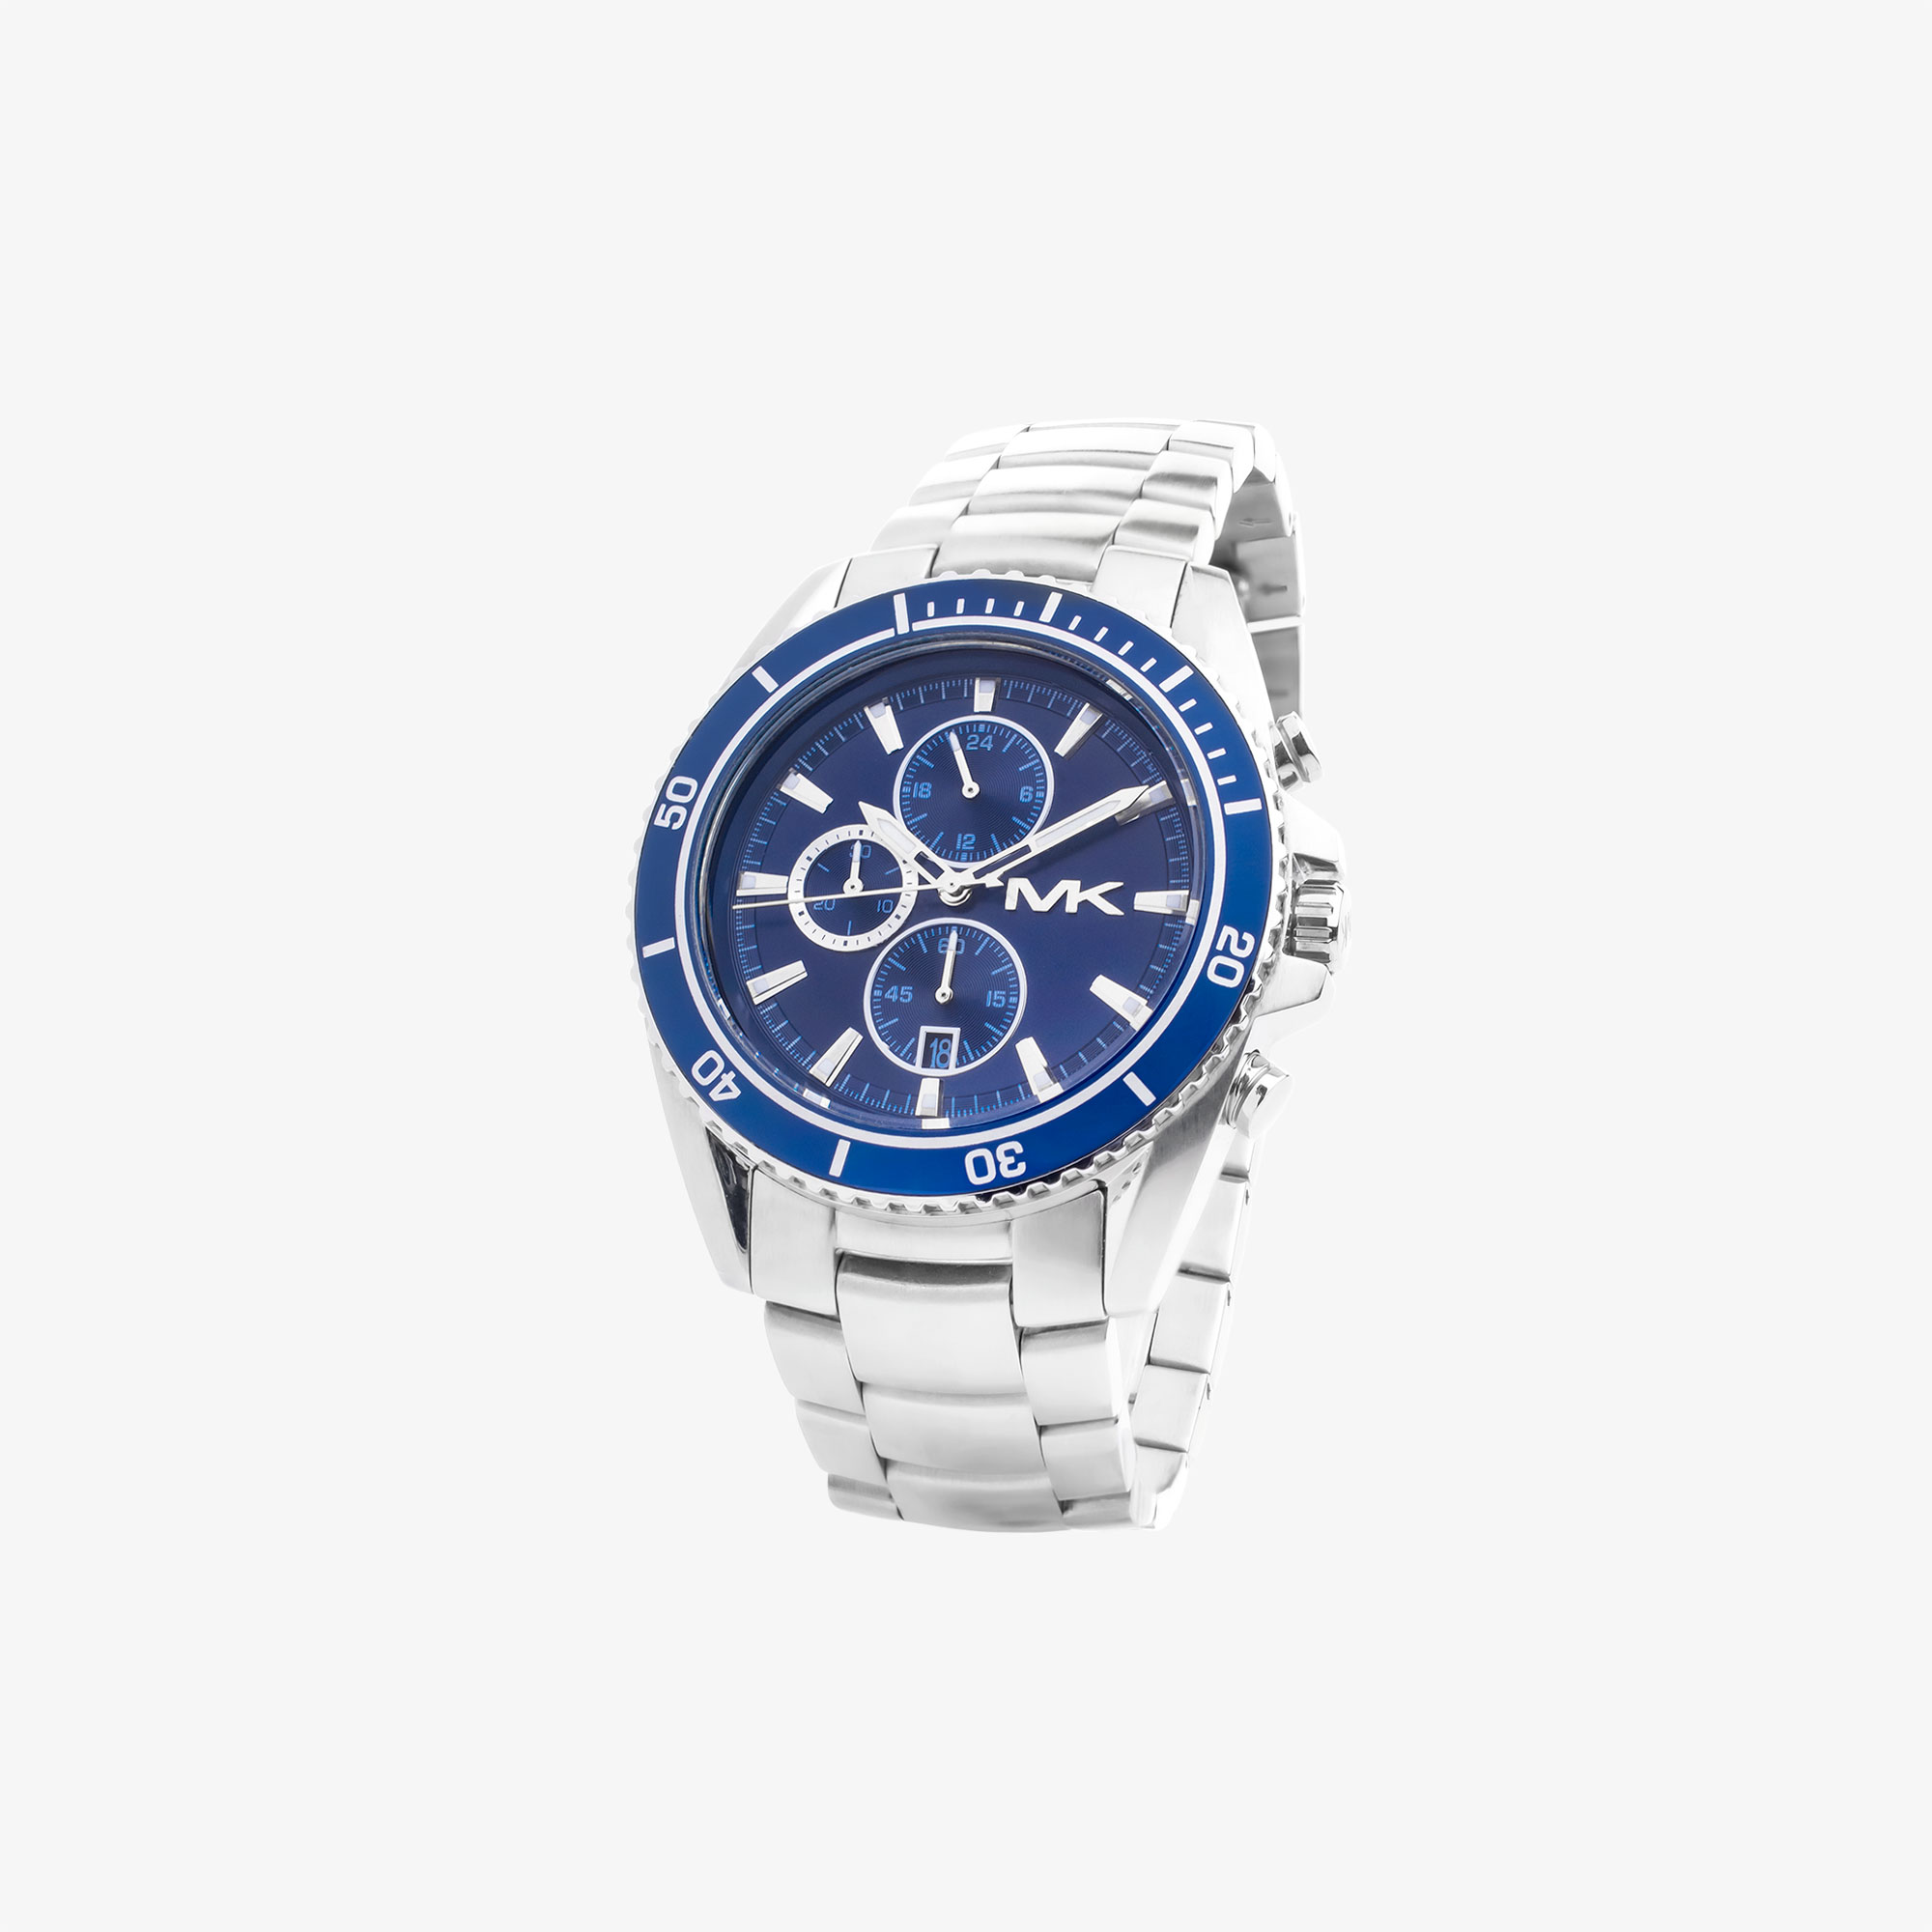 MICHAEL KORS JETMASTER CHRONOGRAPH WITH BLUE DIAL